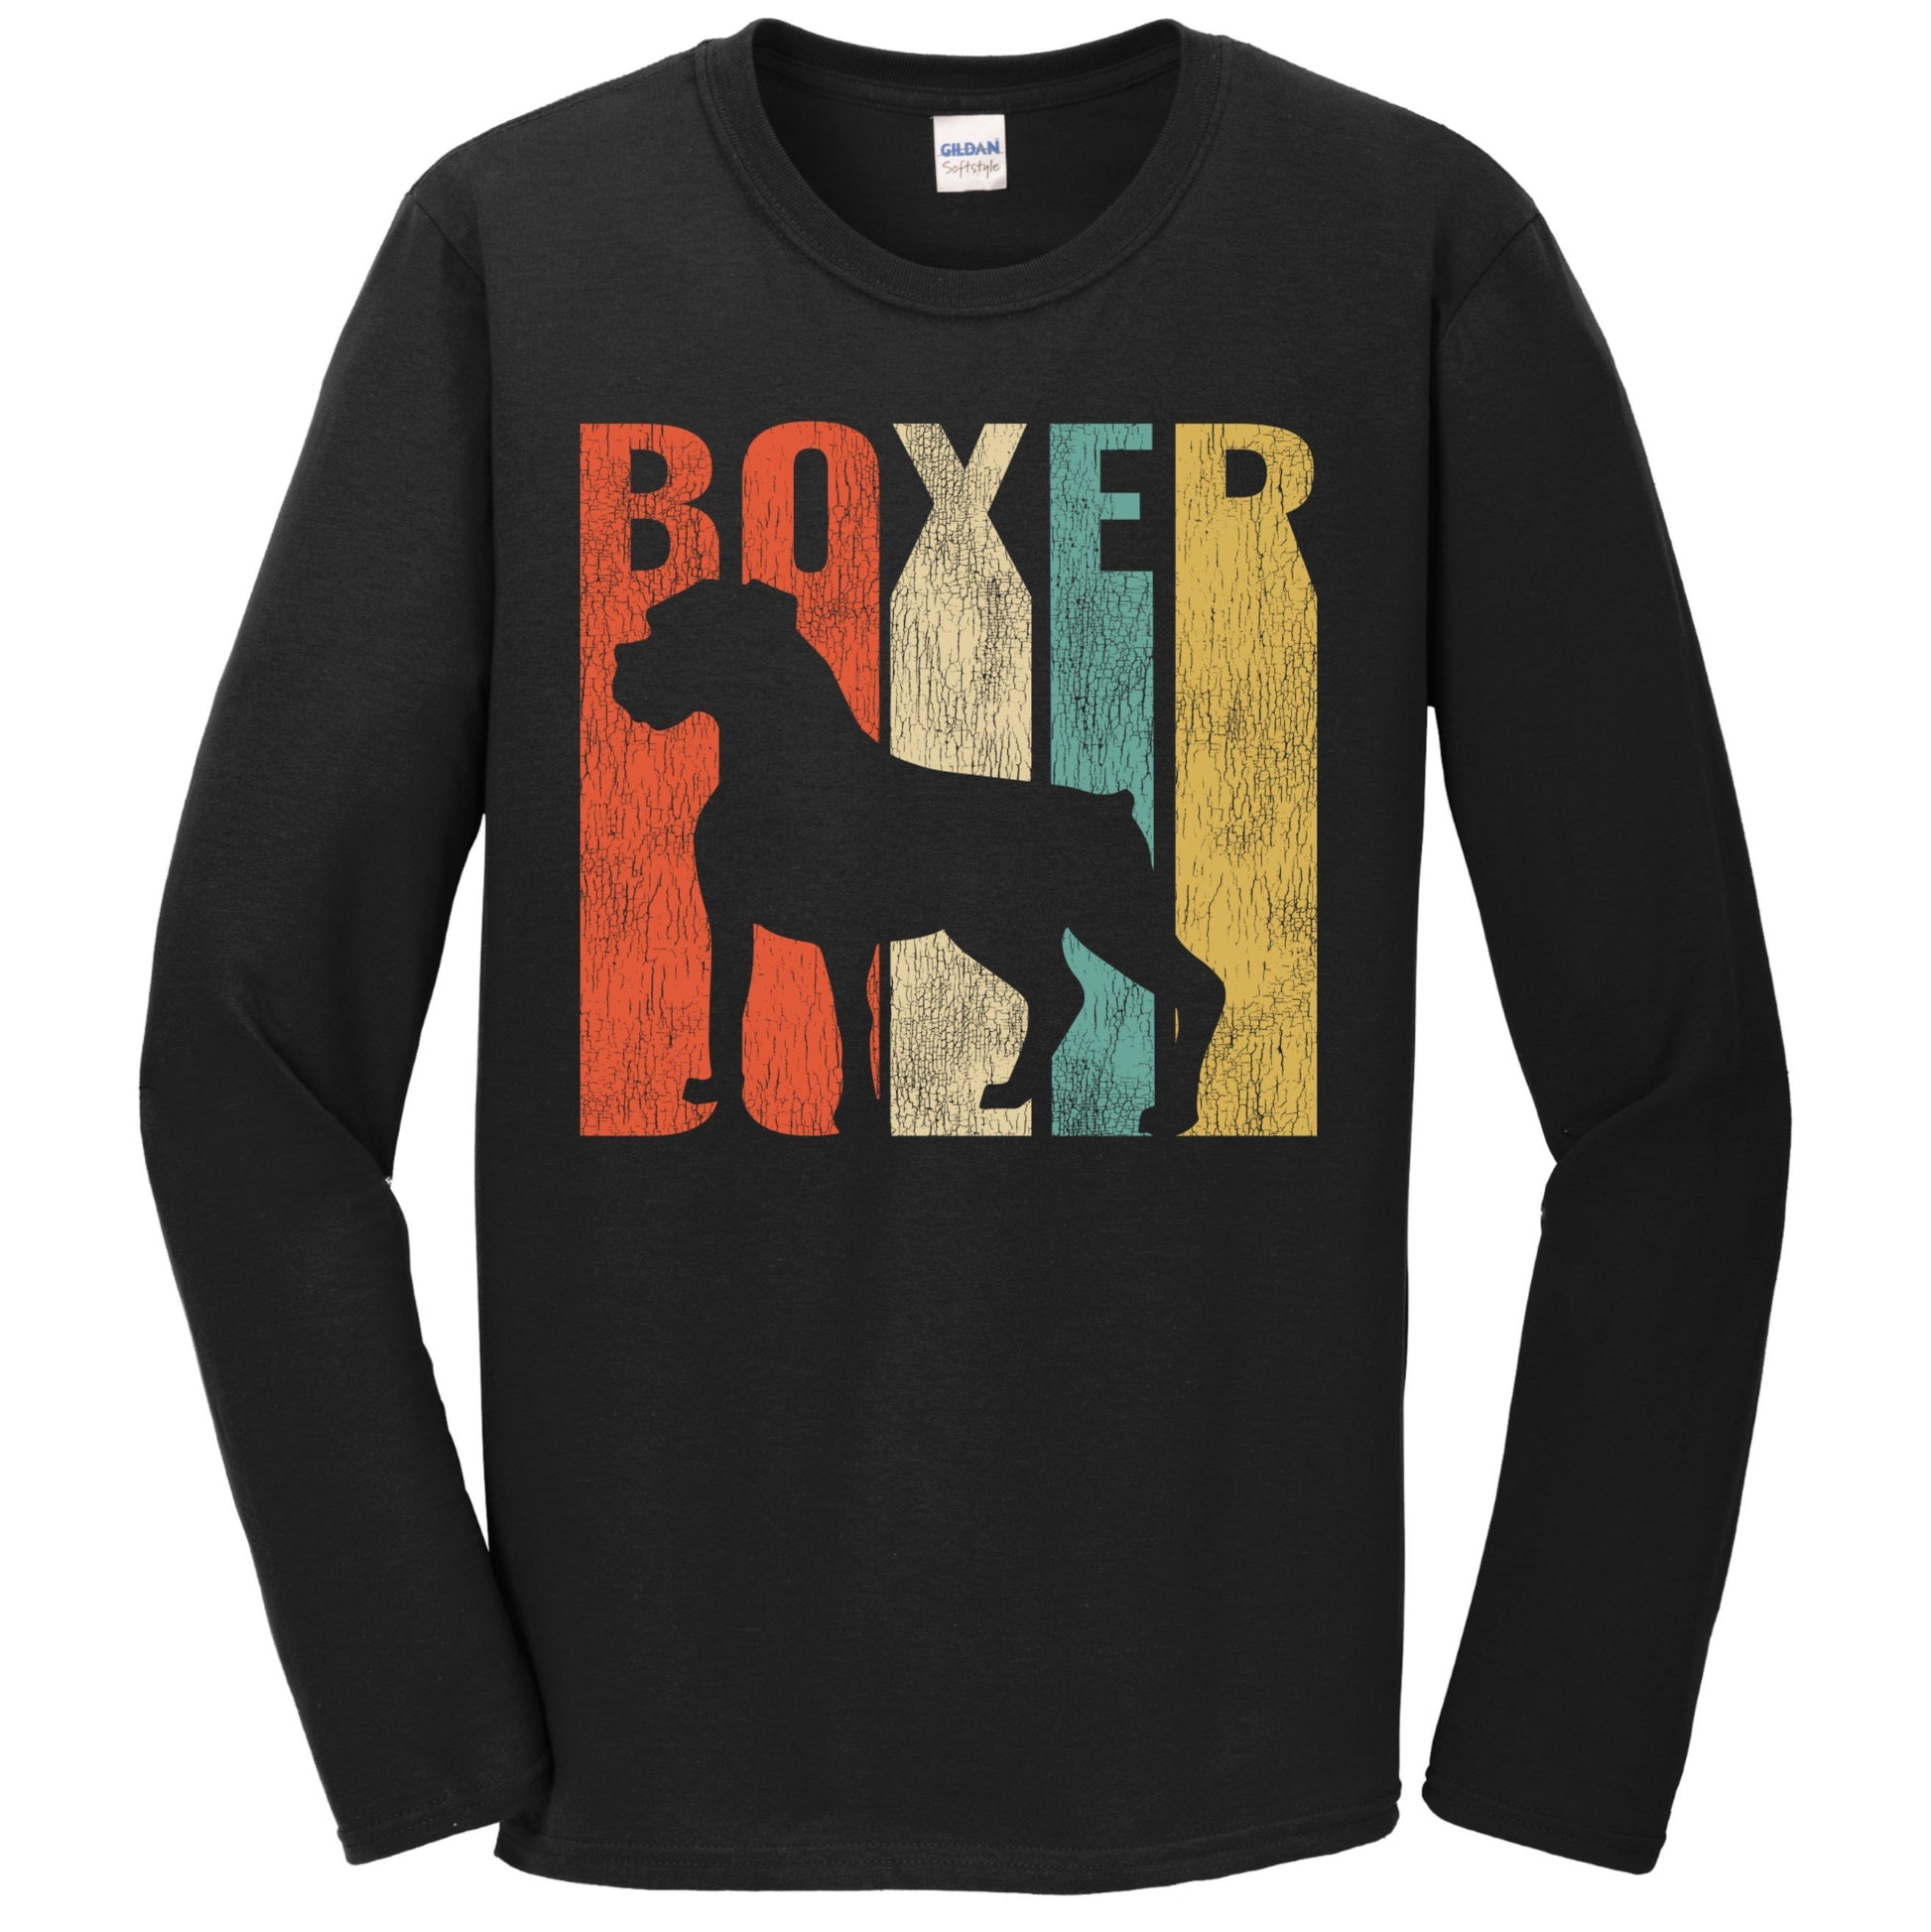 Retro 1970's Style Boxer Dog Silhouette Cracked Distressed Long Sleeve T-Shirt